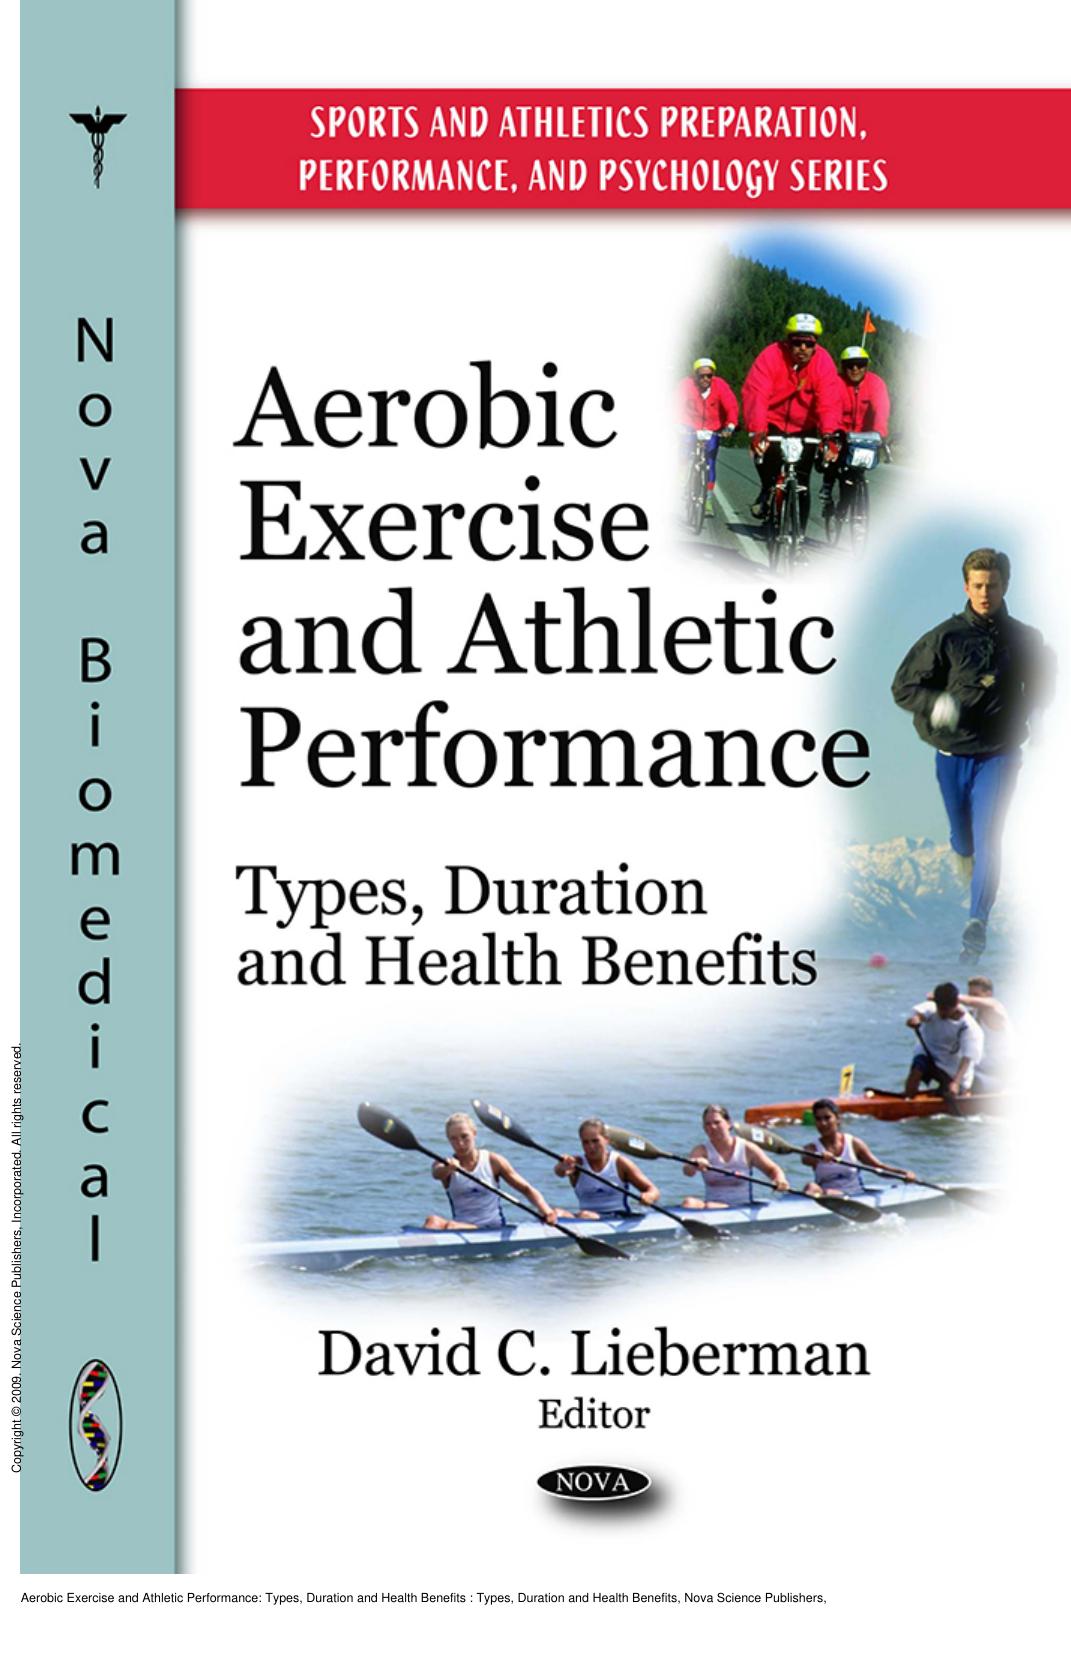 Aerobic Exercise and Athletic Performance: Types, Duration and Health Benefits : Types, Duration and Health Benefits by David C. Lieberman